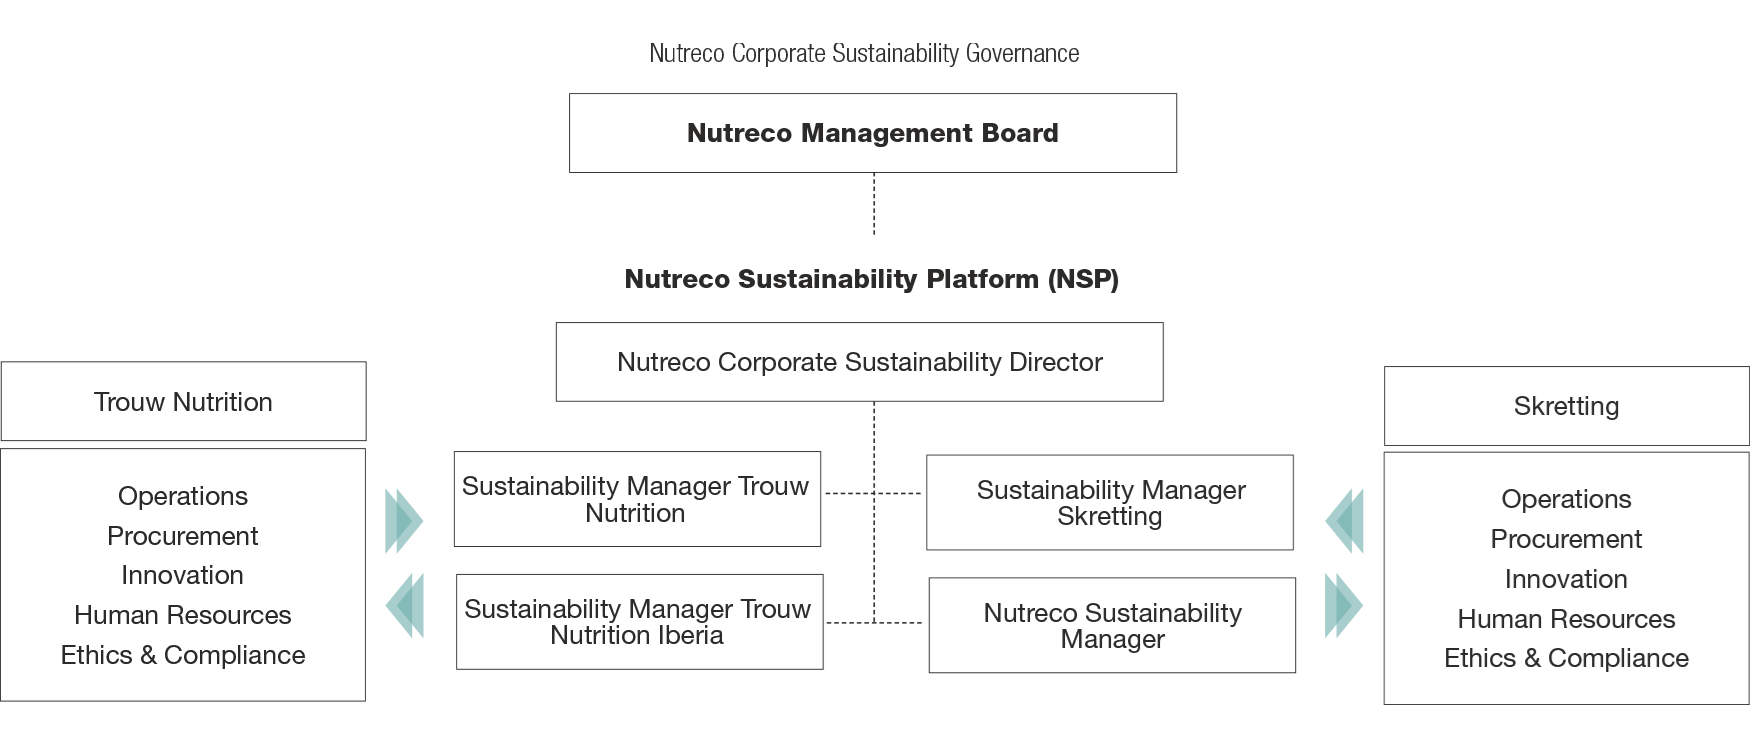 Nutreco Corporate Sustainability Governance table